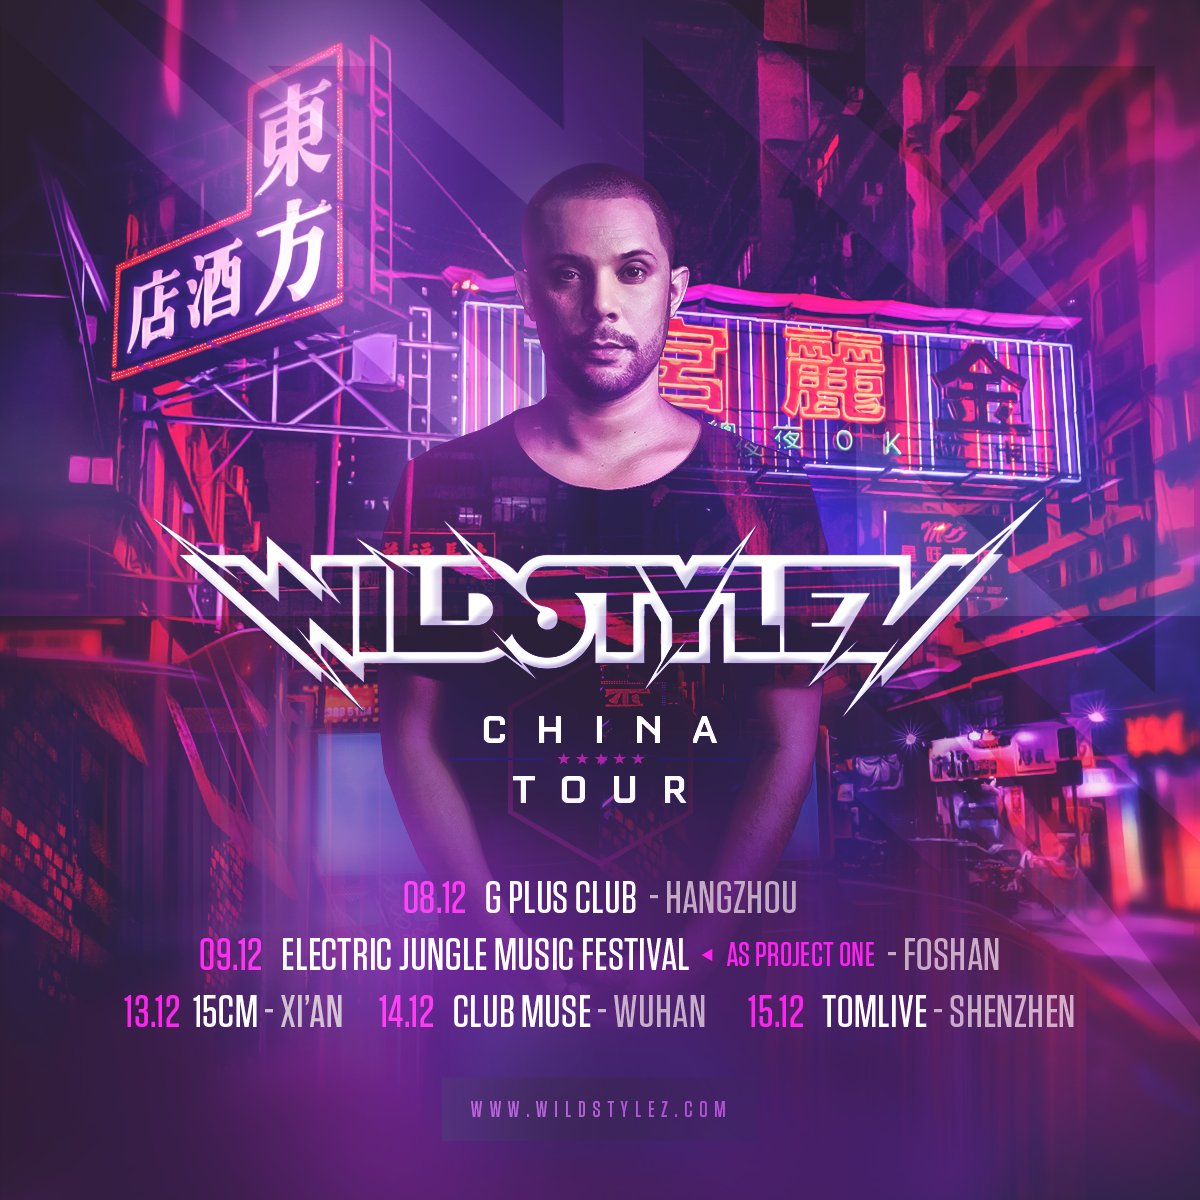 Crazy week ahead in CHINA!! Excited for this one! ❤️🙌 https://t.co/wUJUh3hSxa